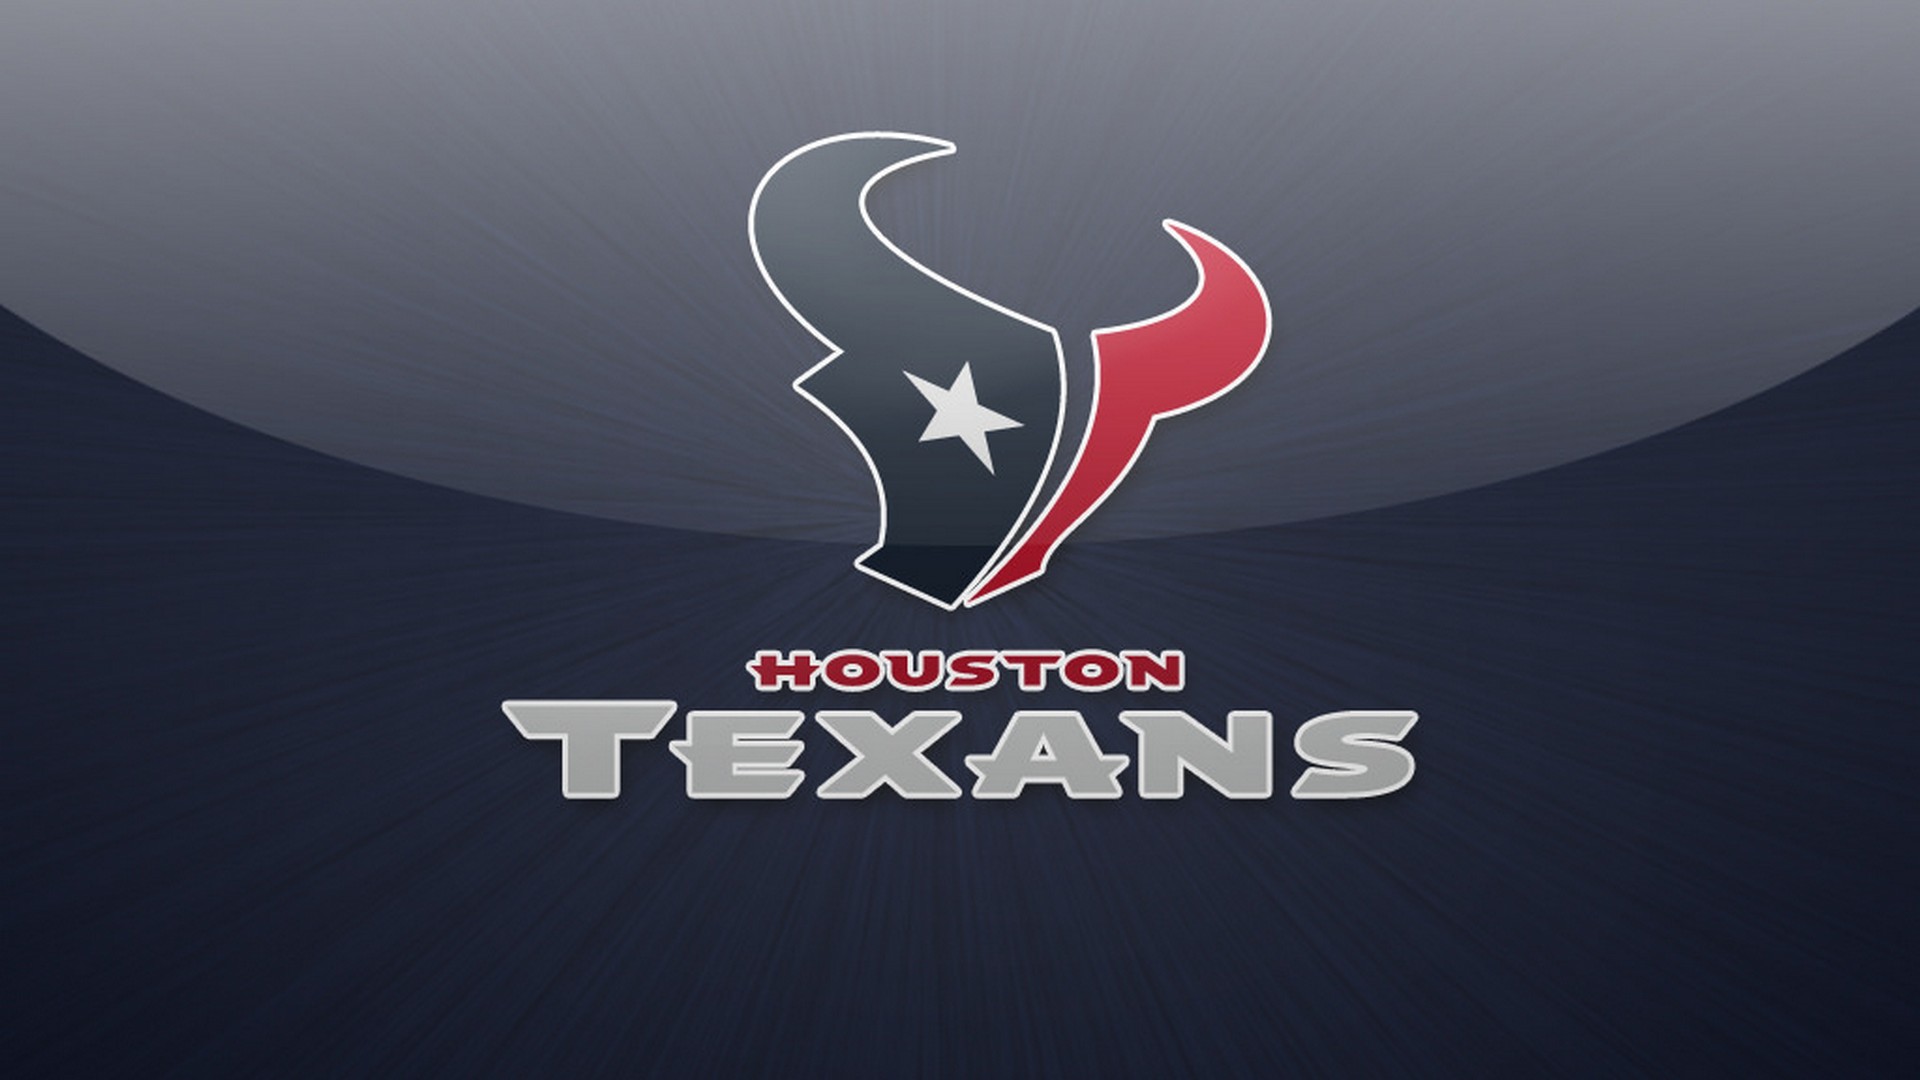 Wallpapers HD Houston Texans With Resolution 1920X1080